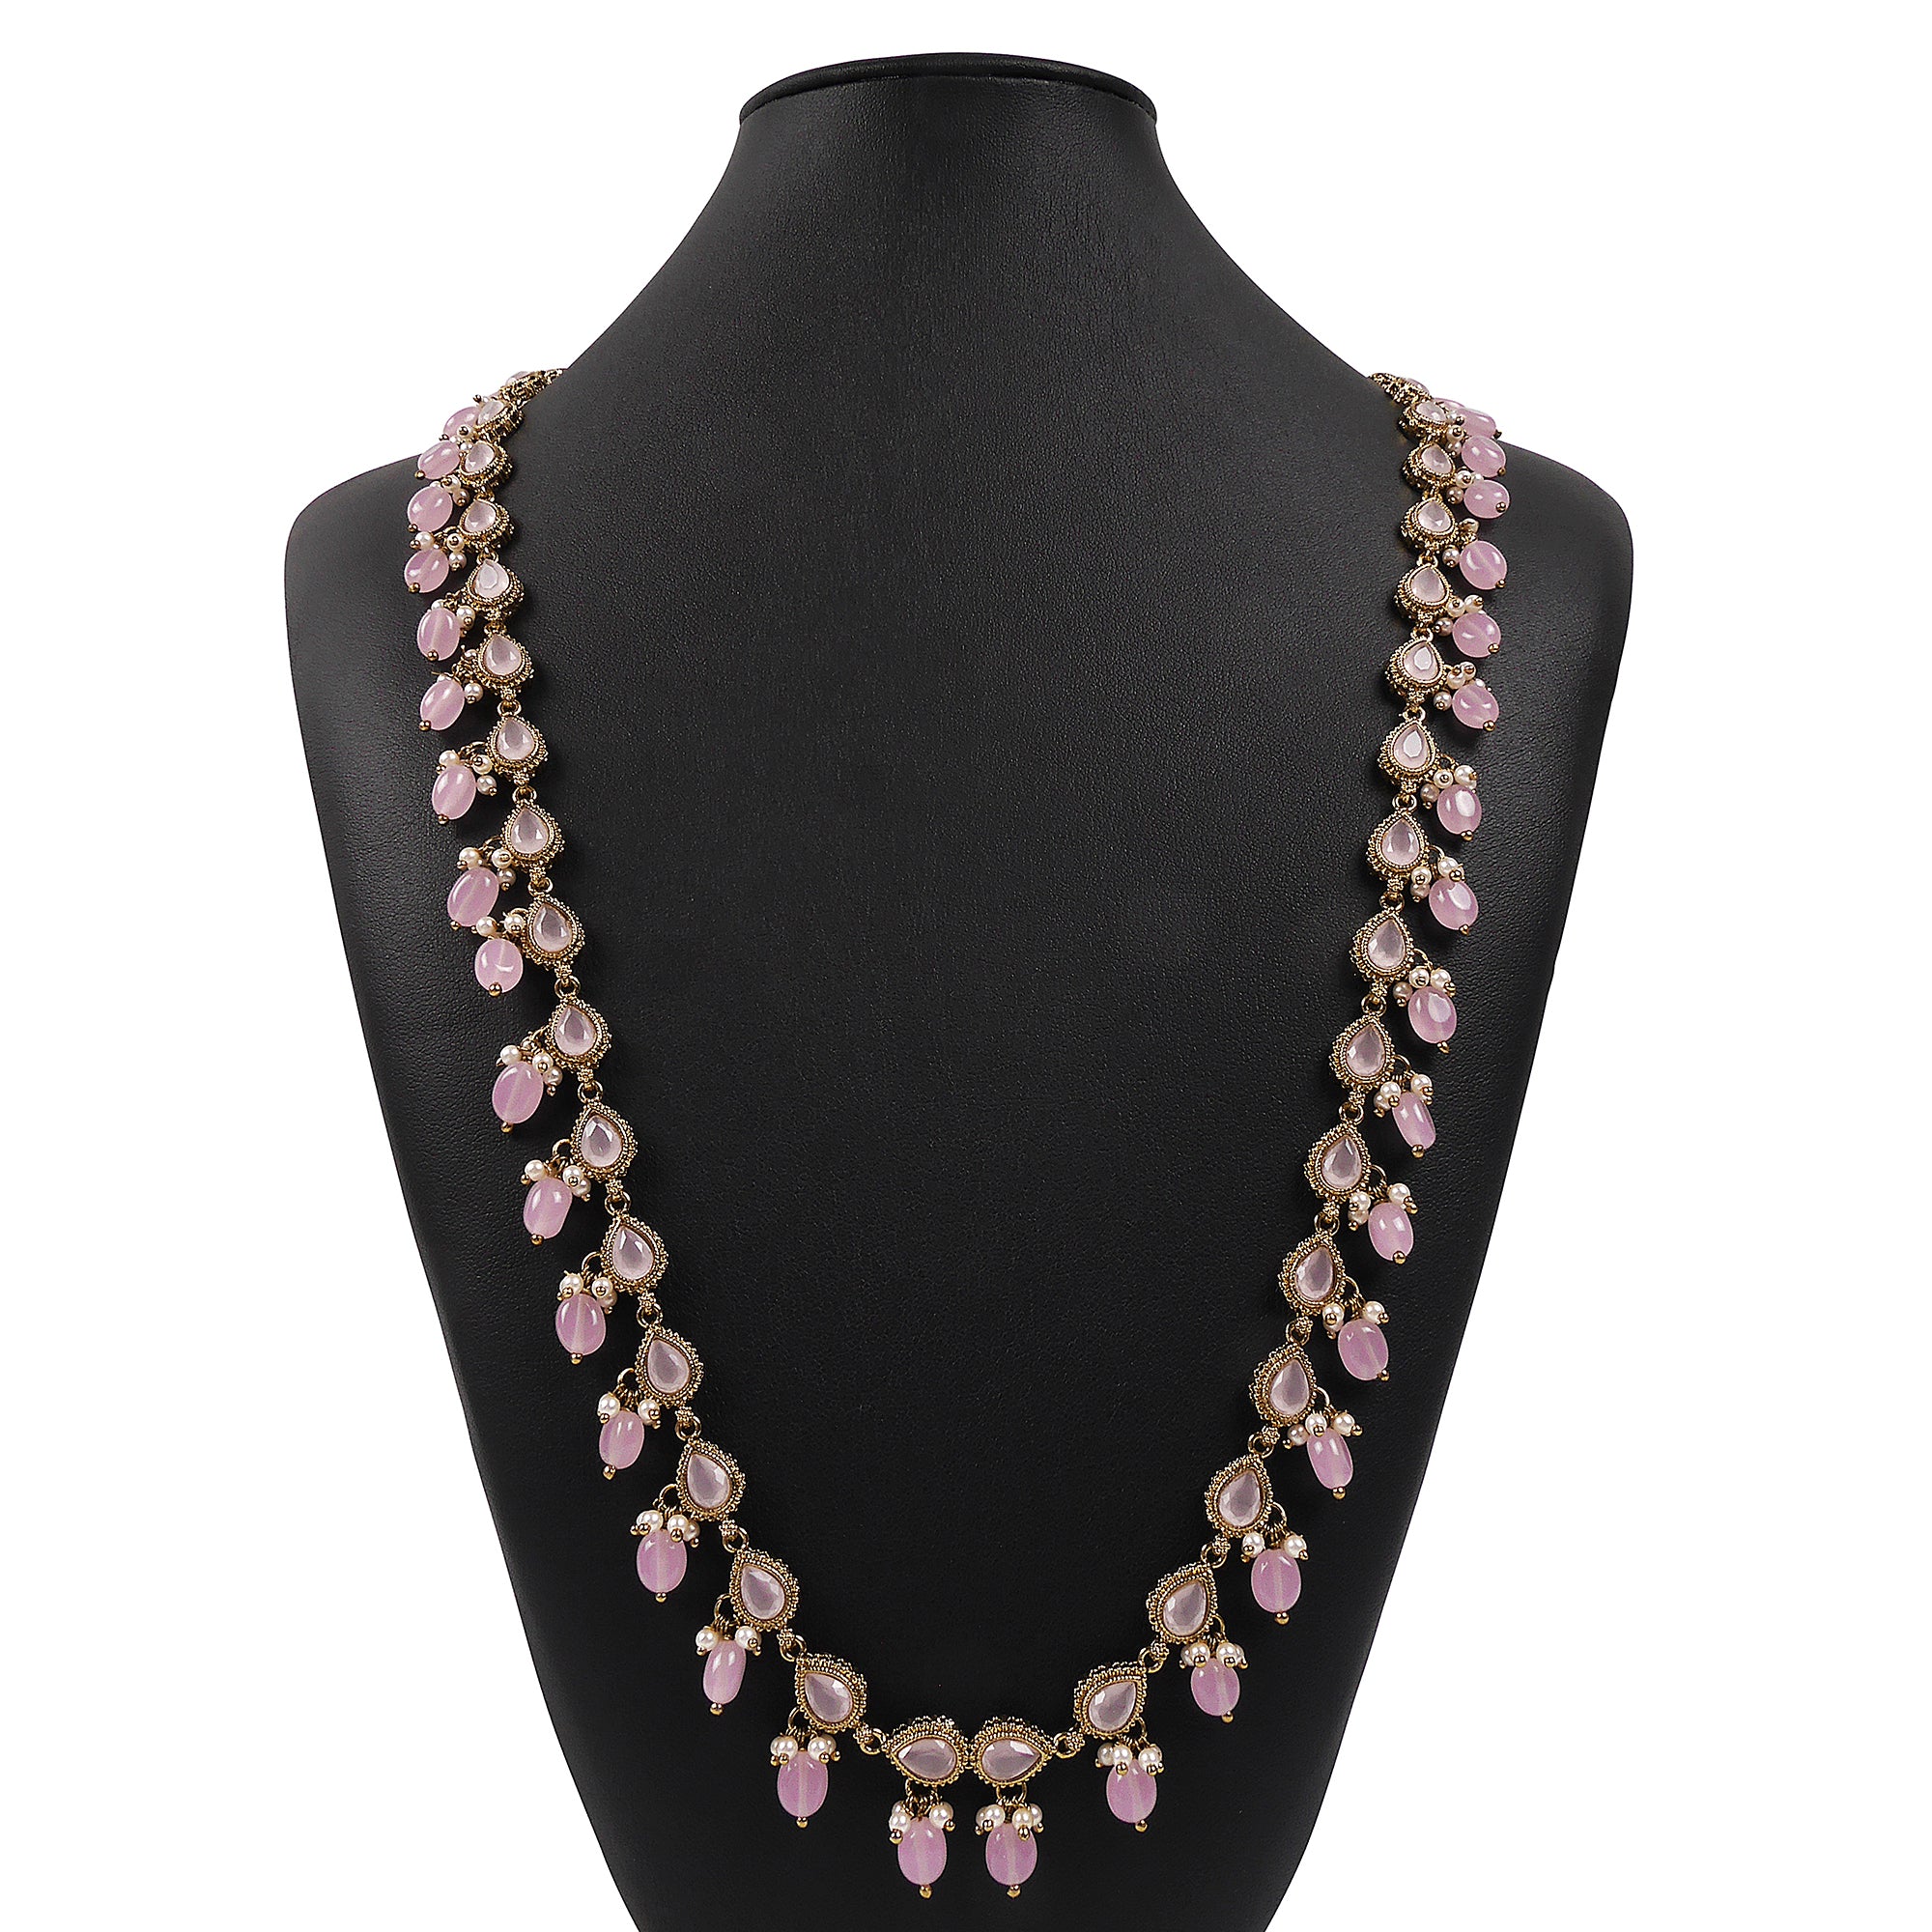 Ariana Long Necklace in Light Pink